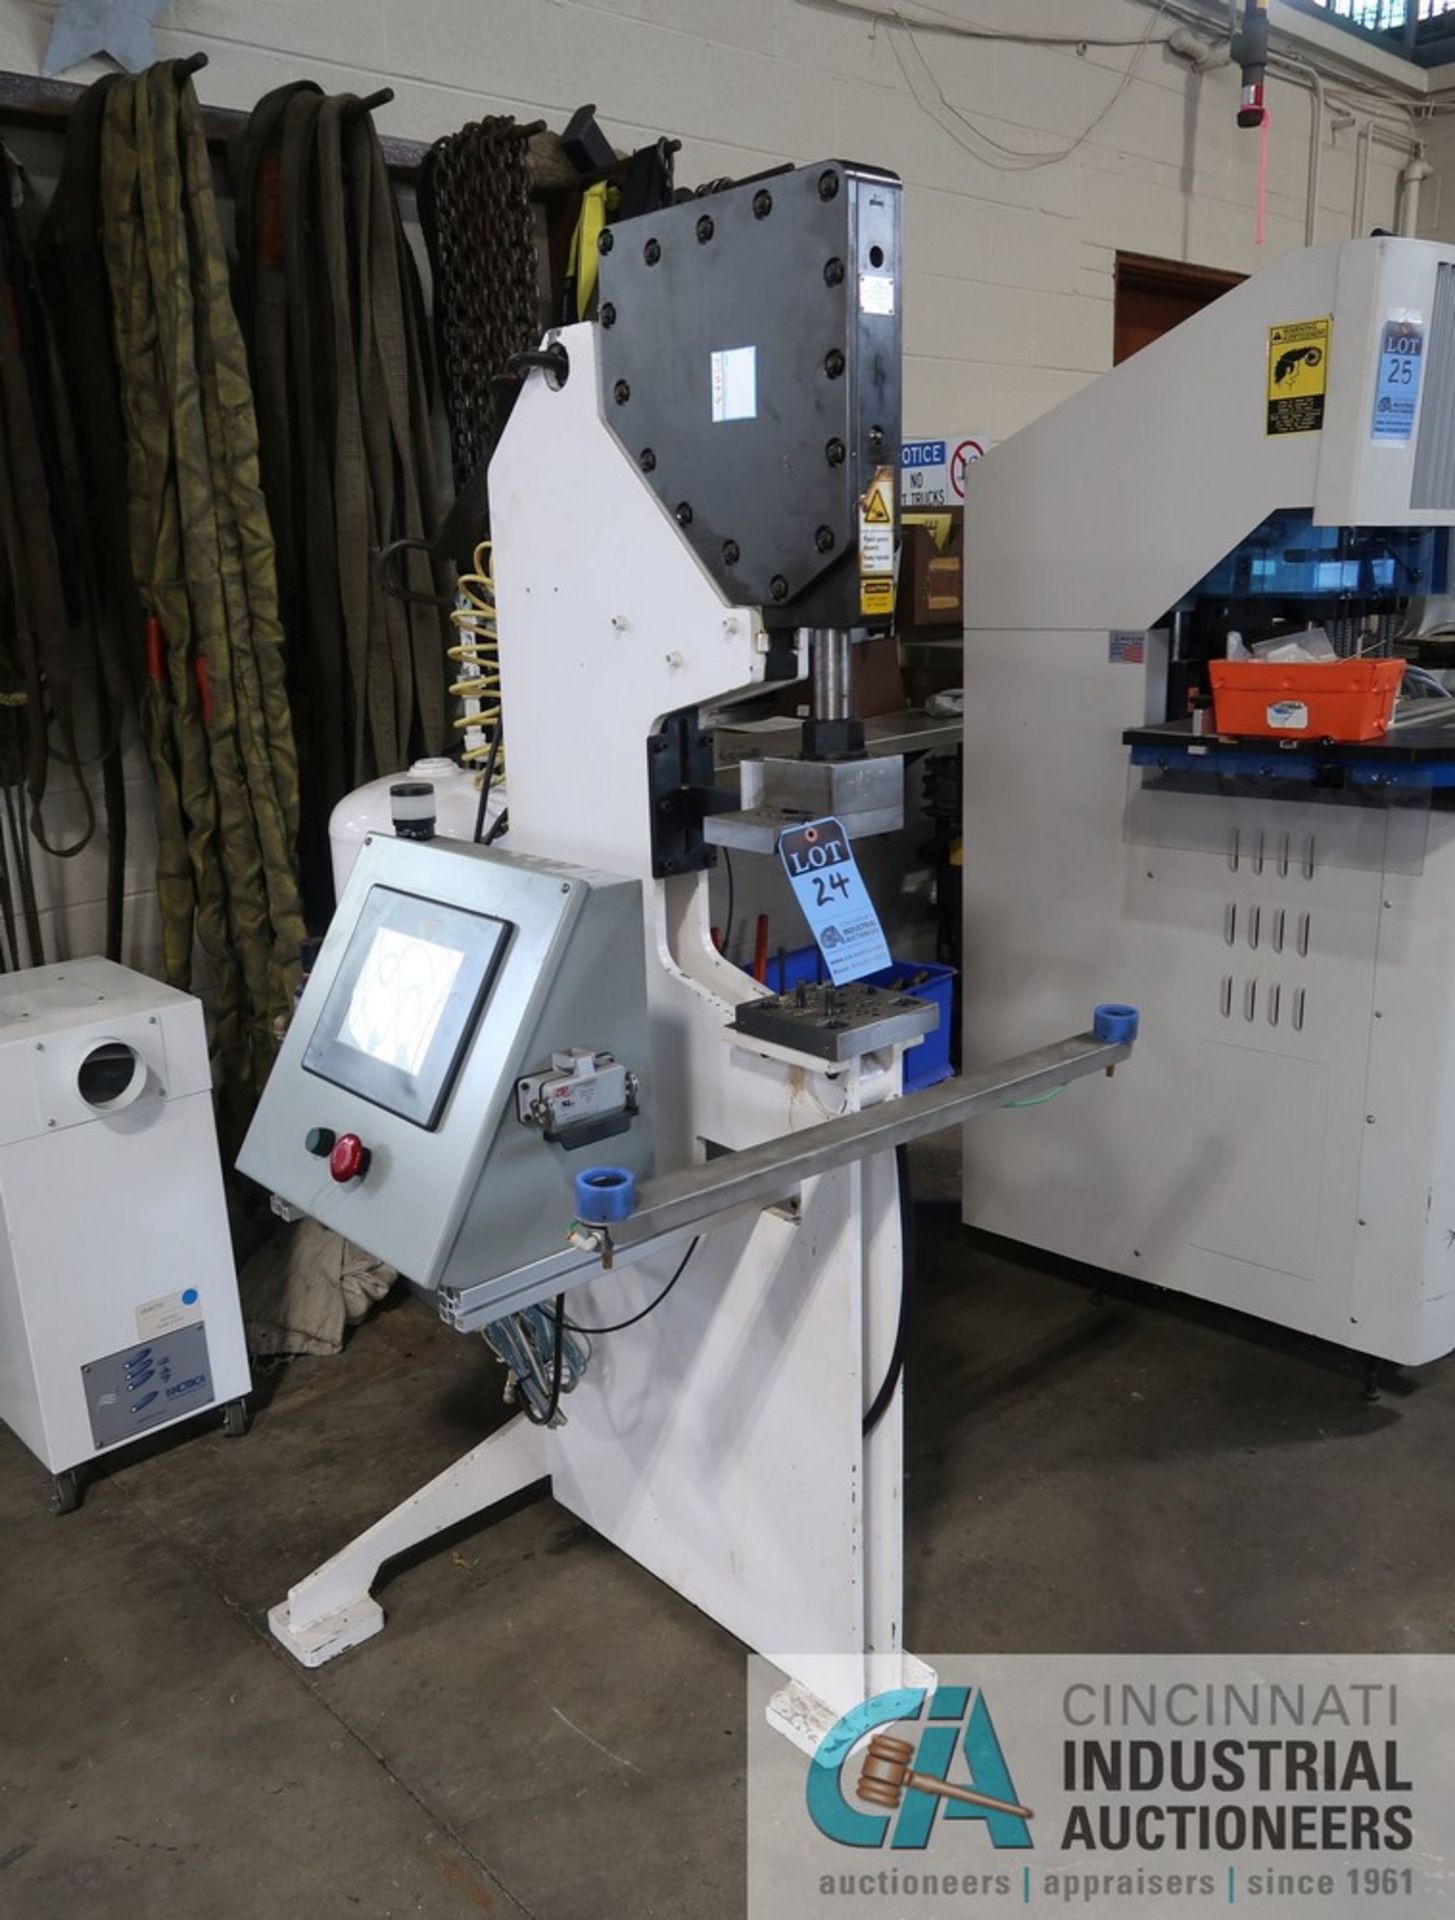 BTM CORP MODEL P5HX3 TOG-L-LOC SHEET METAL JOINING SYSTEM - Like new, appears to be very low use